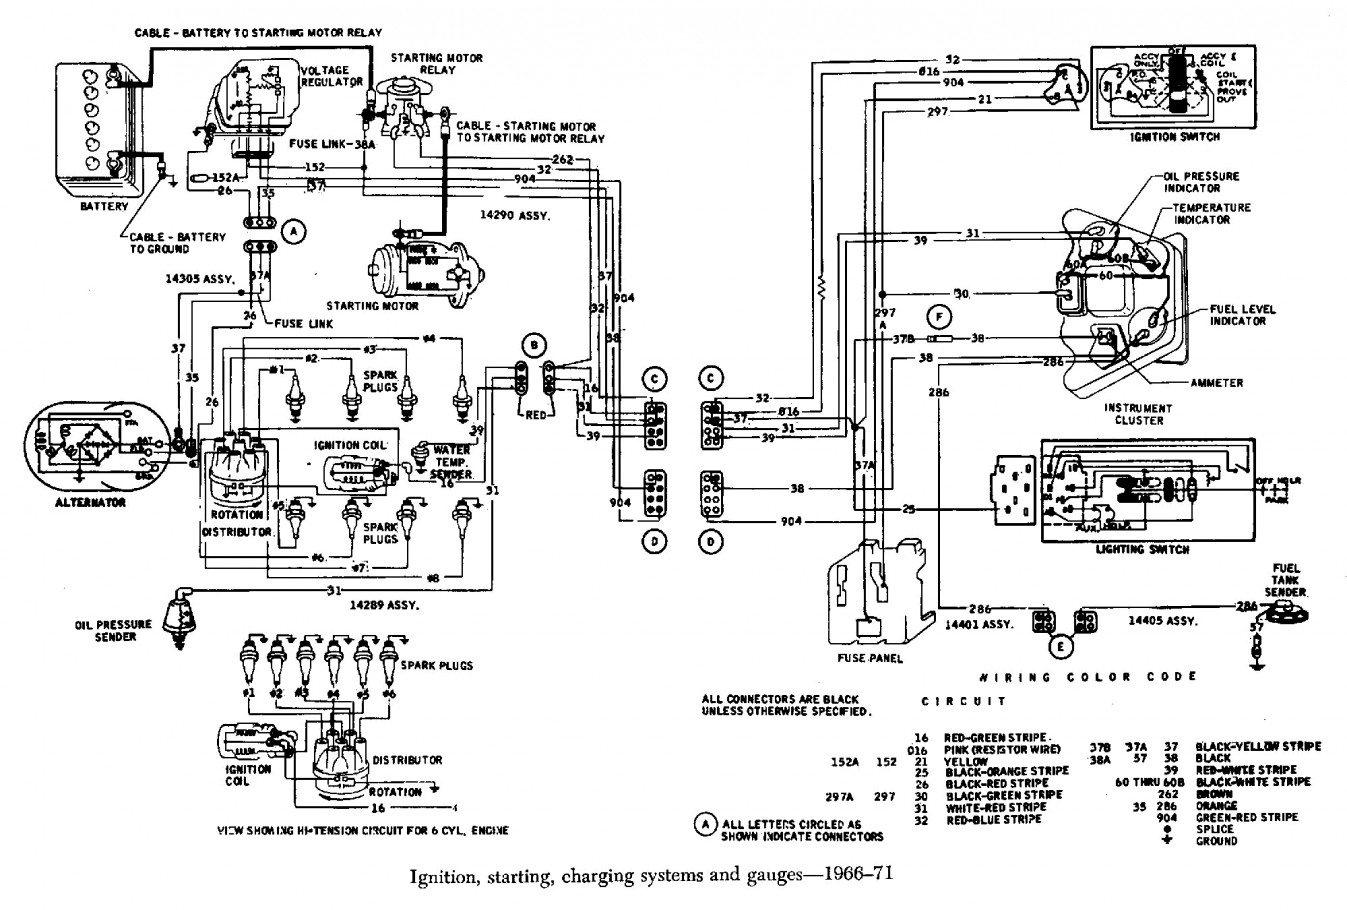 New Chevy 350 Engine Wiring Diagram 400 Sbc Library - Ignition Wiring Diagram Chevy 350